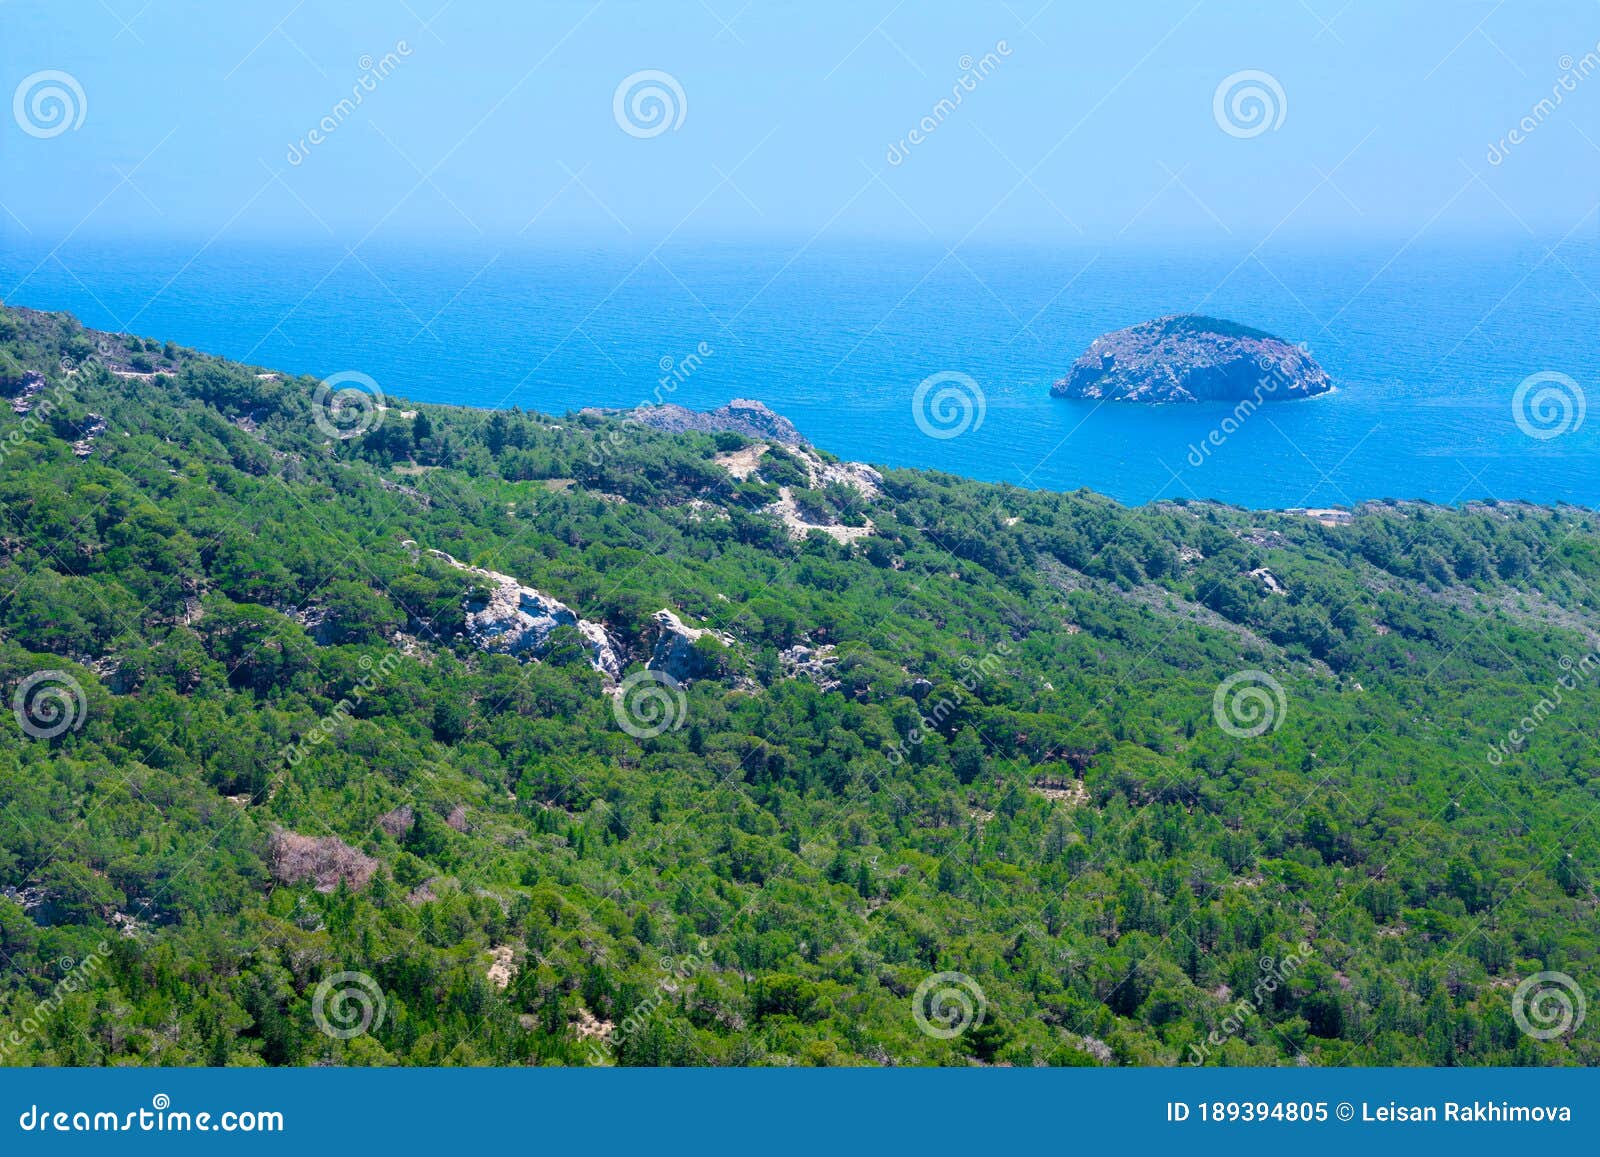 seascape with mediterranien sea, rocks and trees on sunny summer day. summer vacation